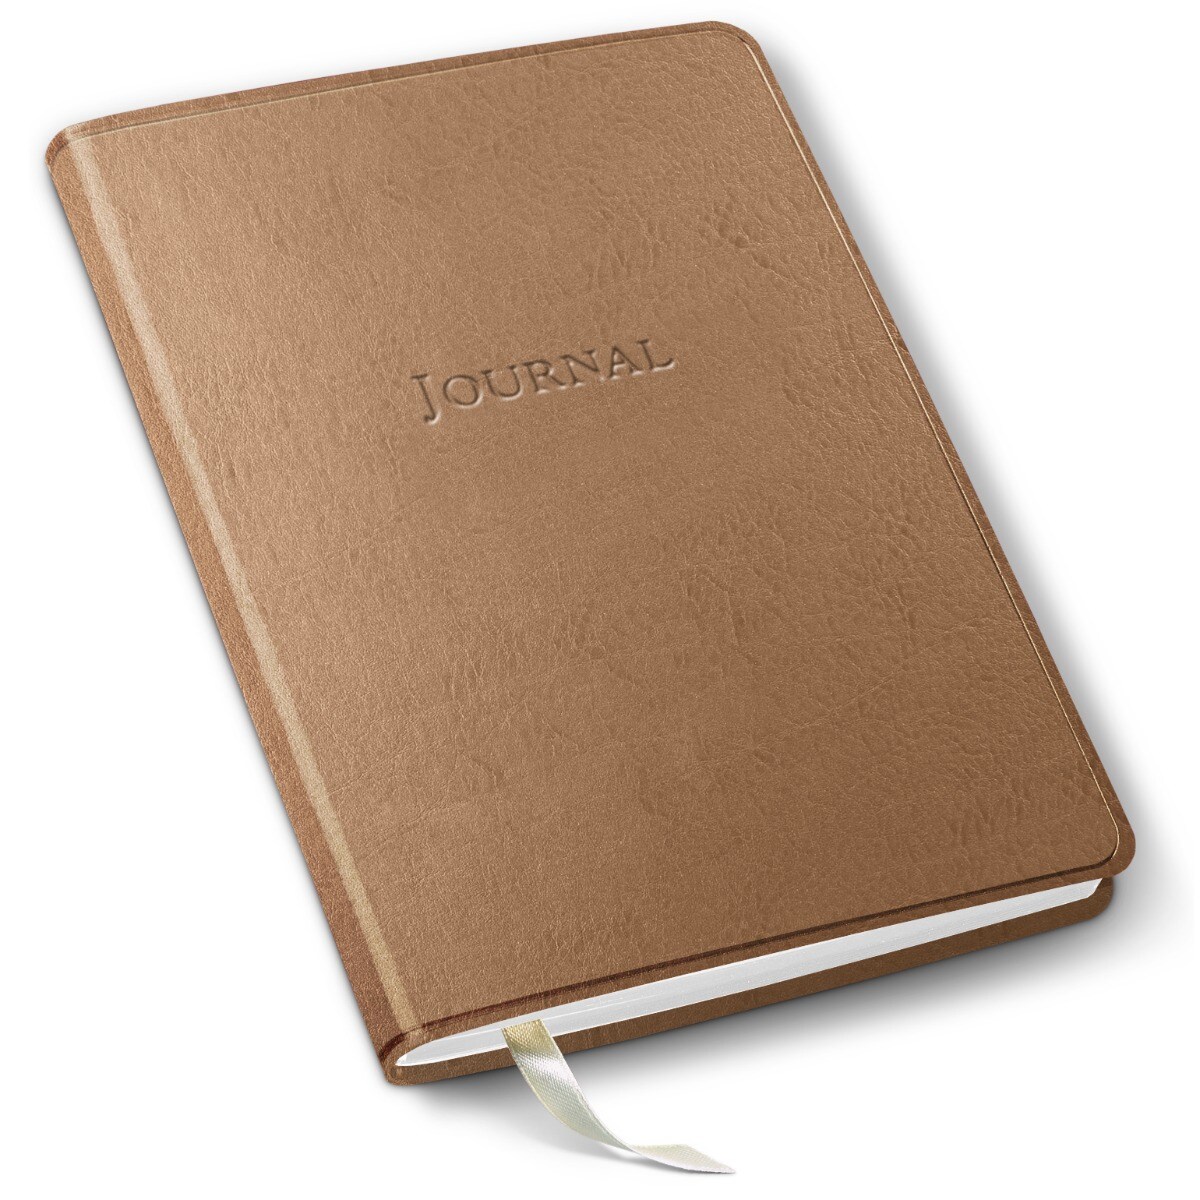 Leather Desk Journal by Gallery Leather - 8"x5.5"